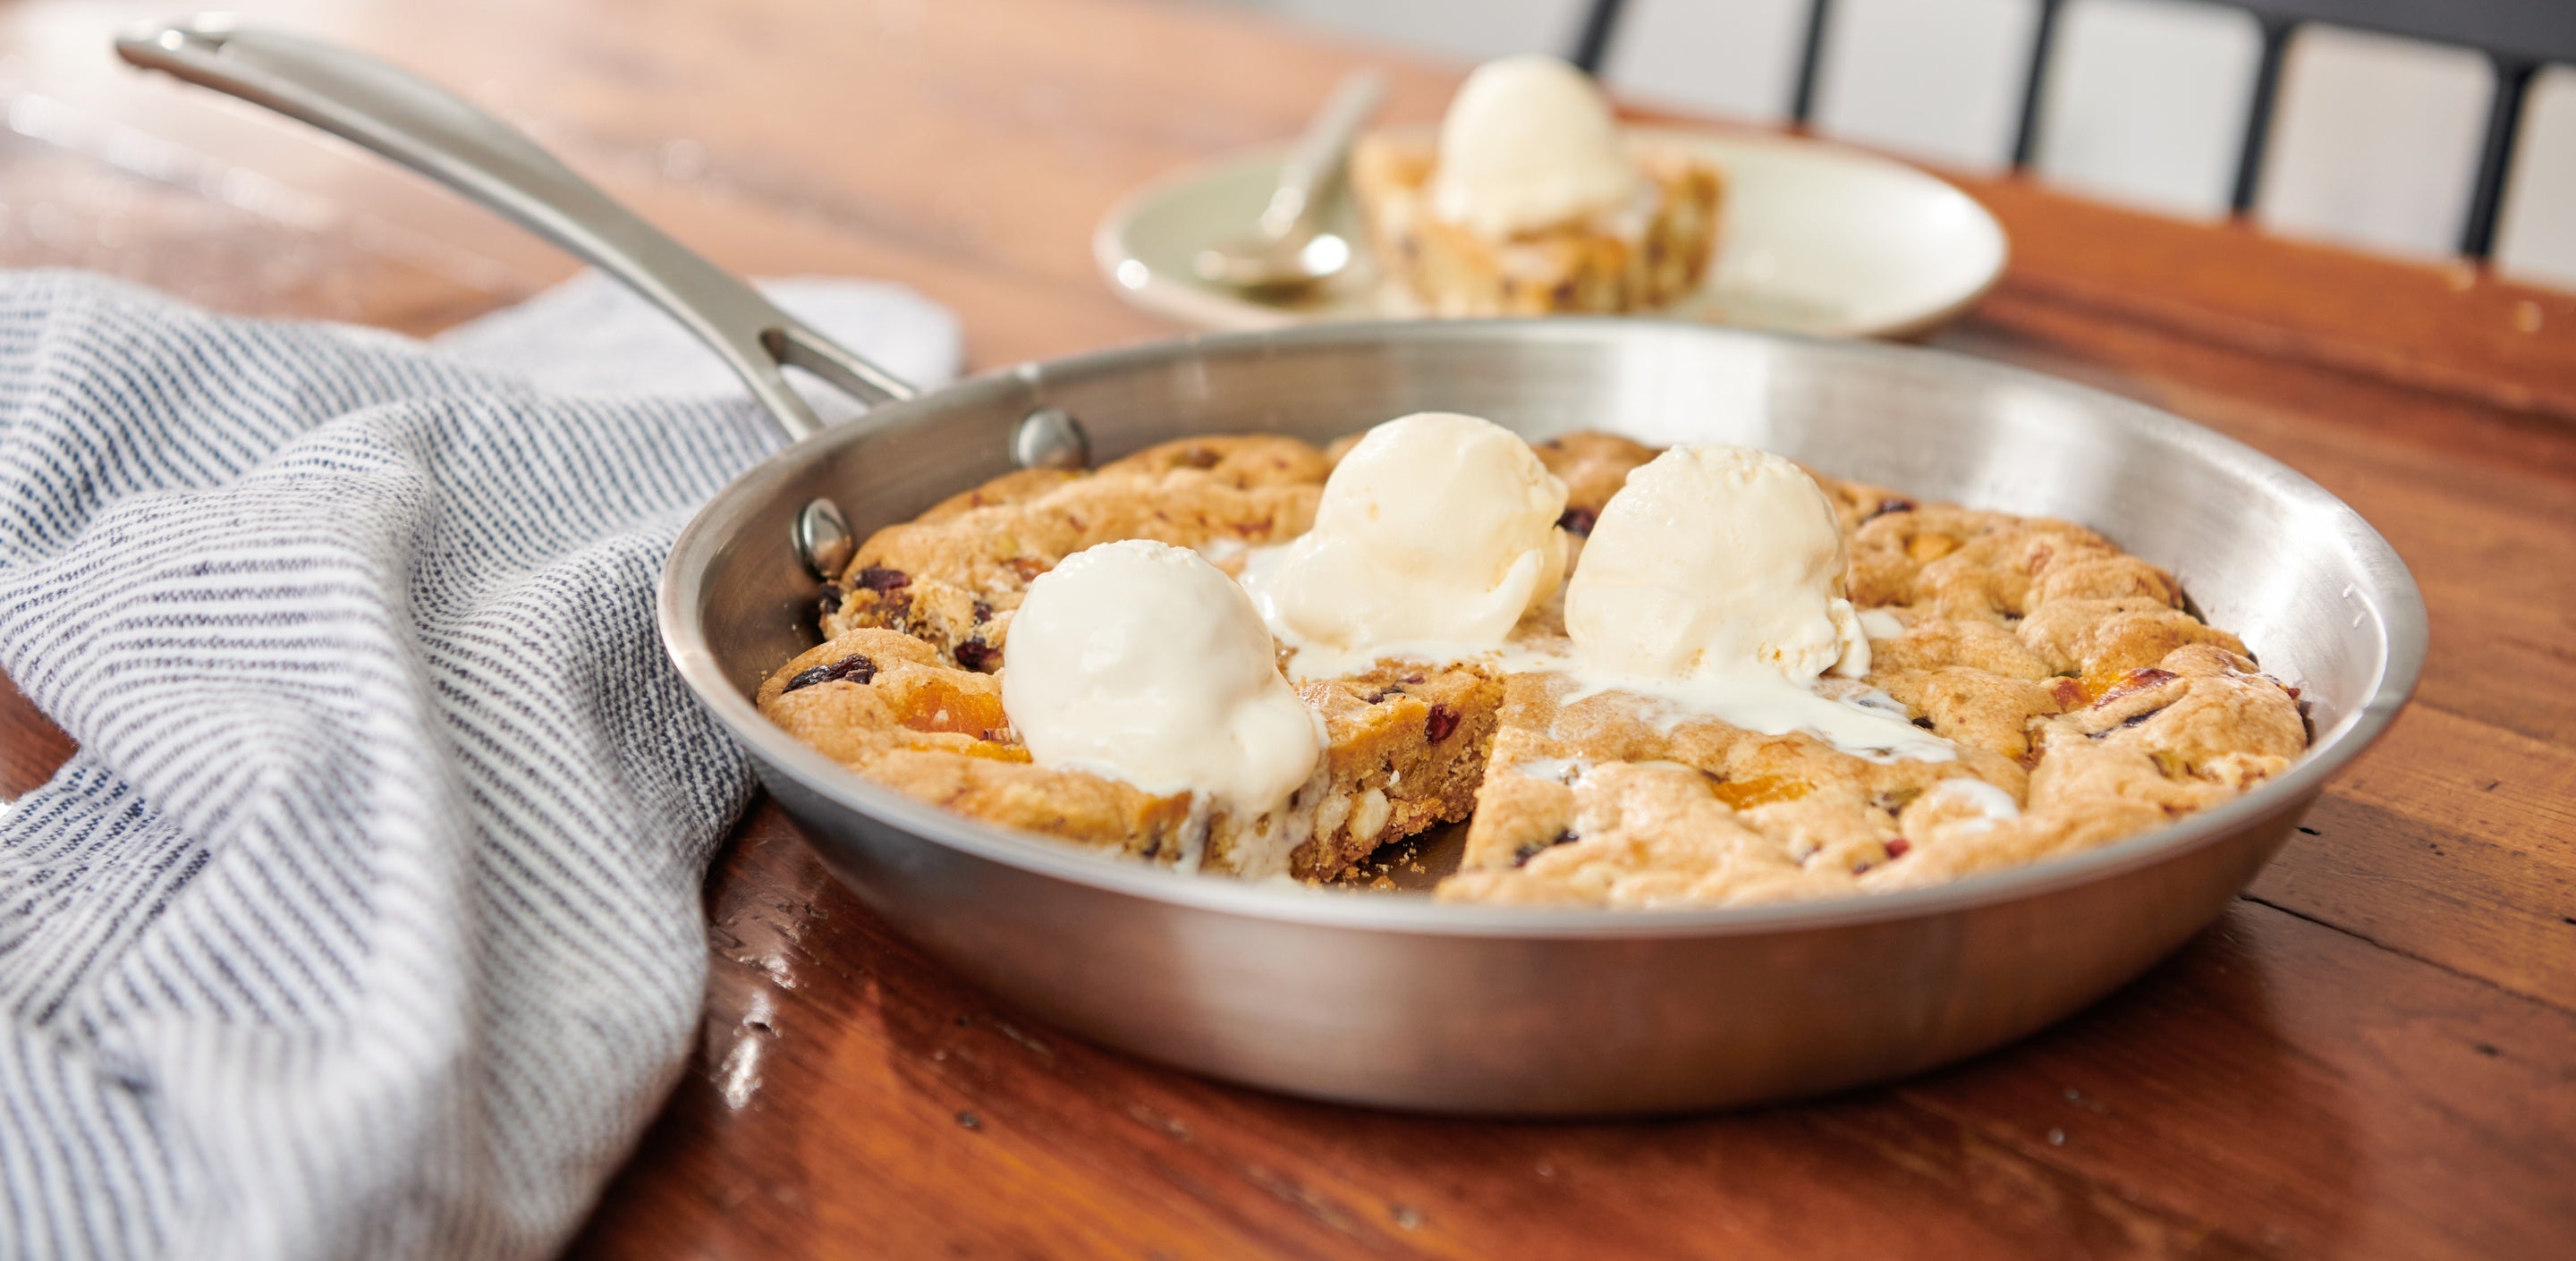 Jumbo Skillet Cookie with White Chocolate, Pistachios, Apricots and Cranberries